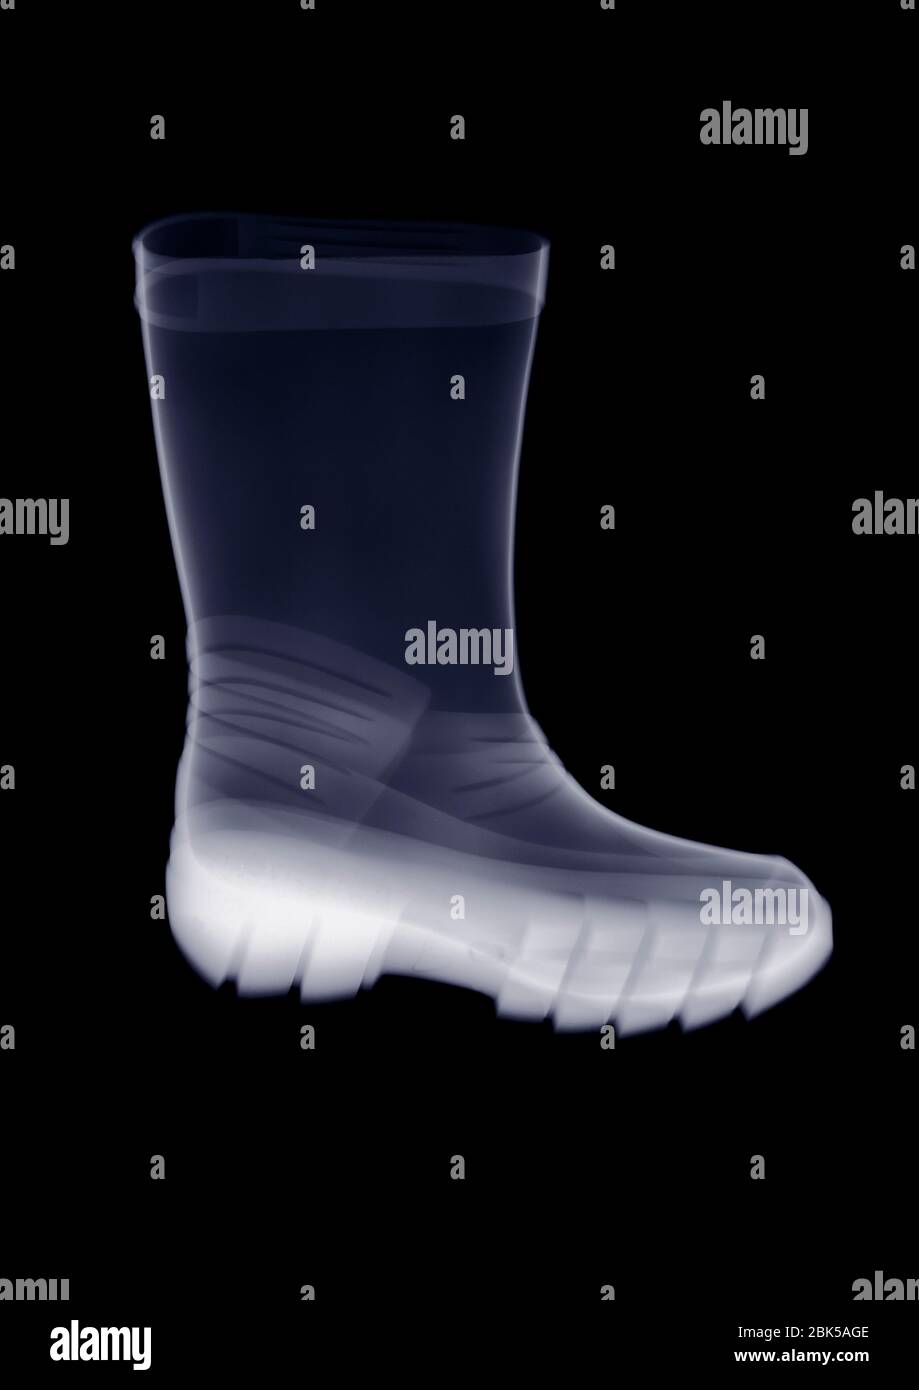 Rubber boot or wellie, X-ray. Stock Photo